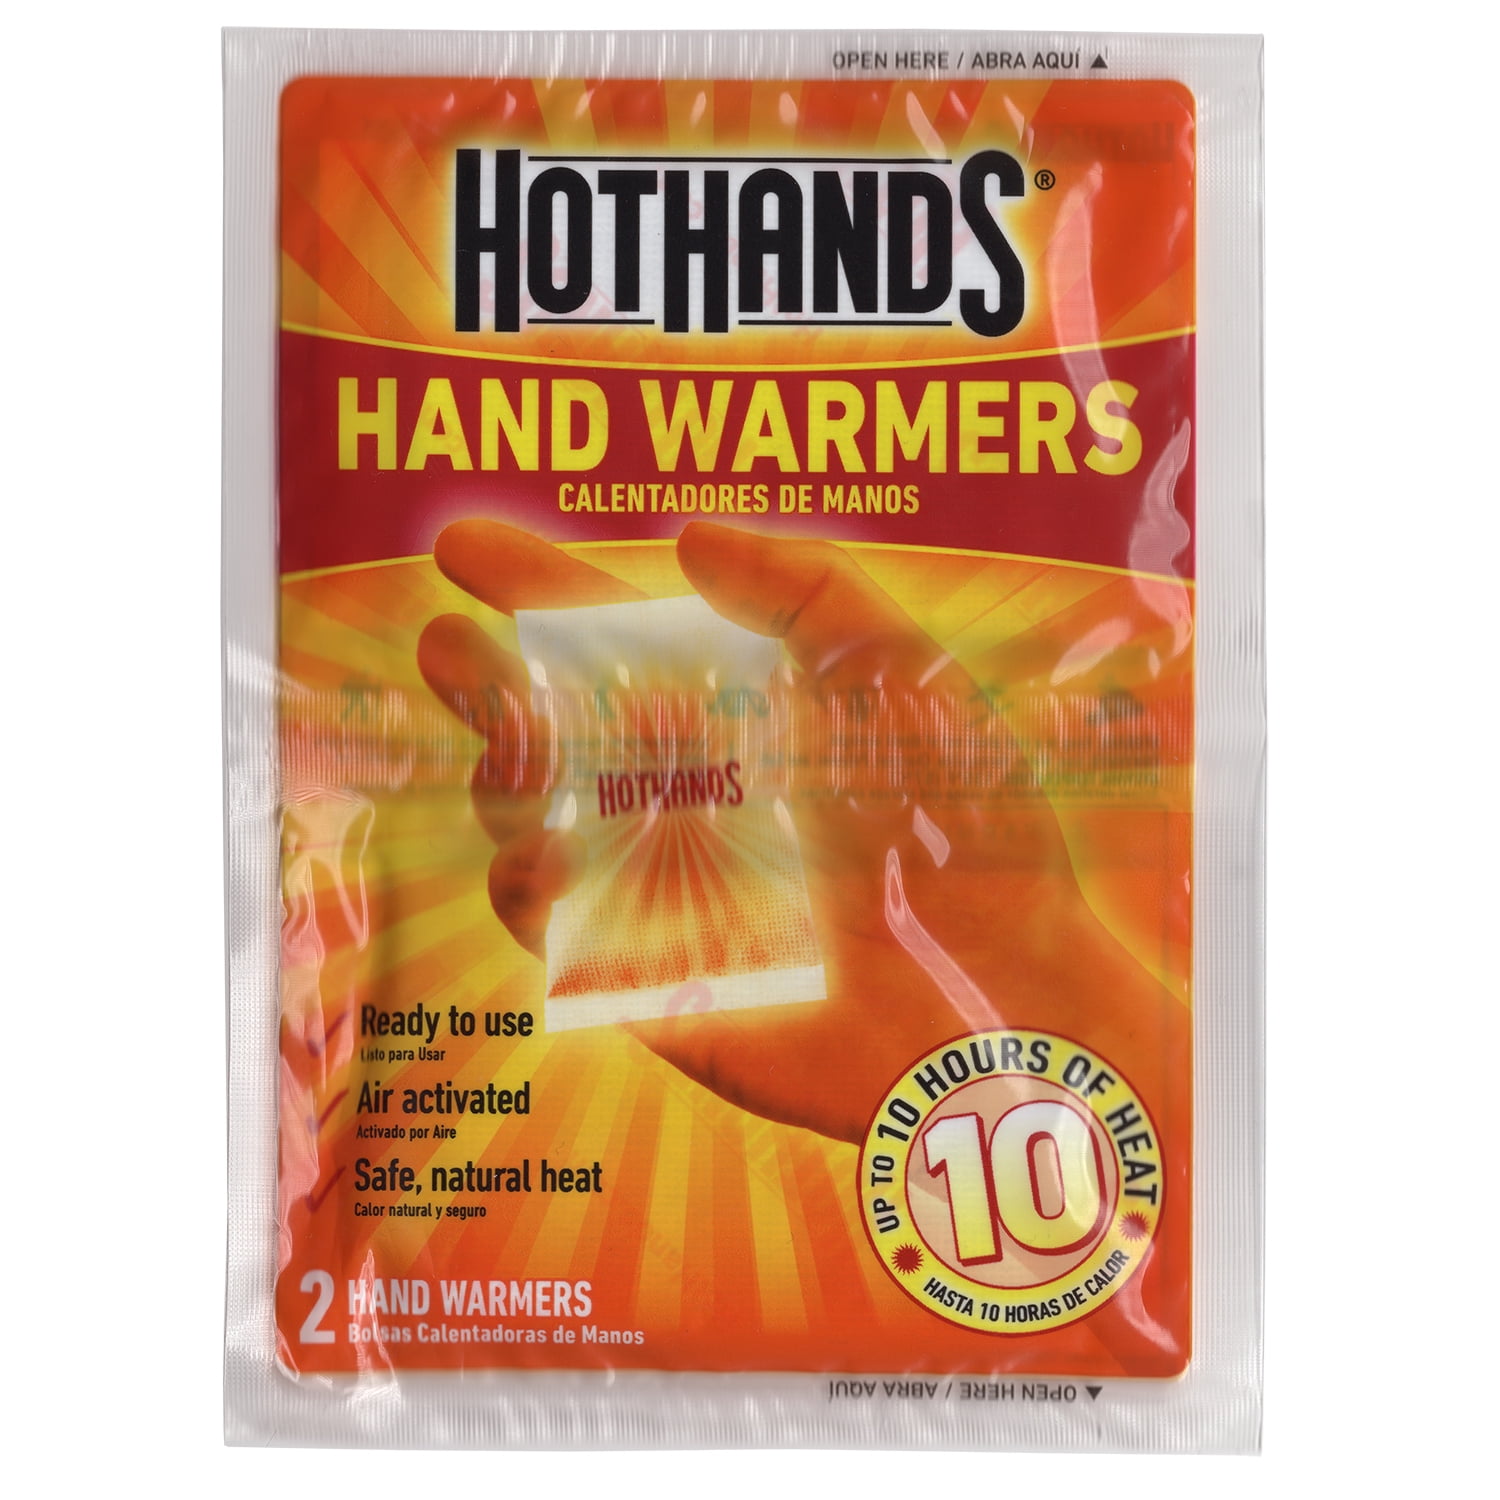 Hot Hands Super Warmer Value 10 Pack 18 Hours Of Heat Large Size Lot of 2 Packs 